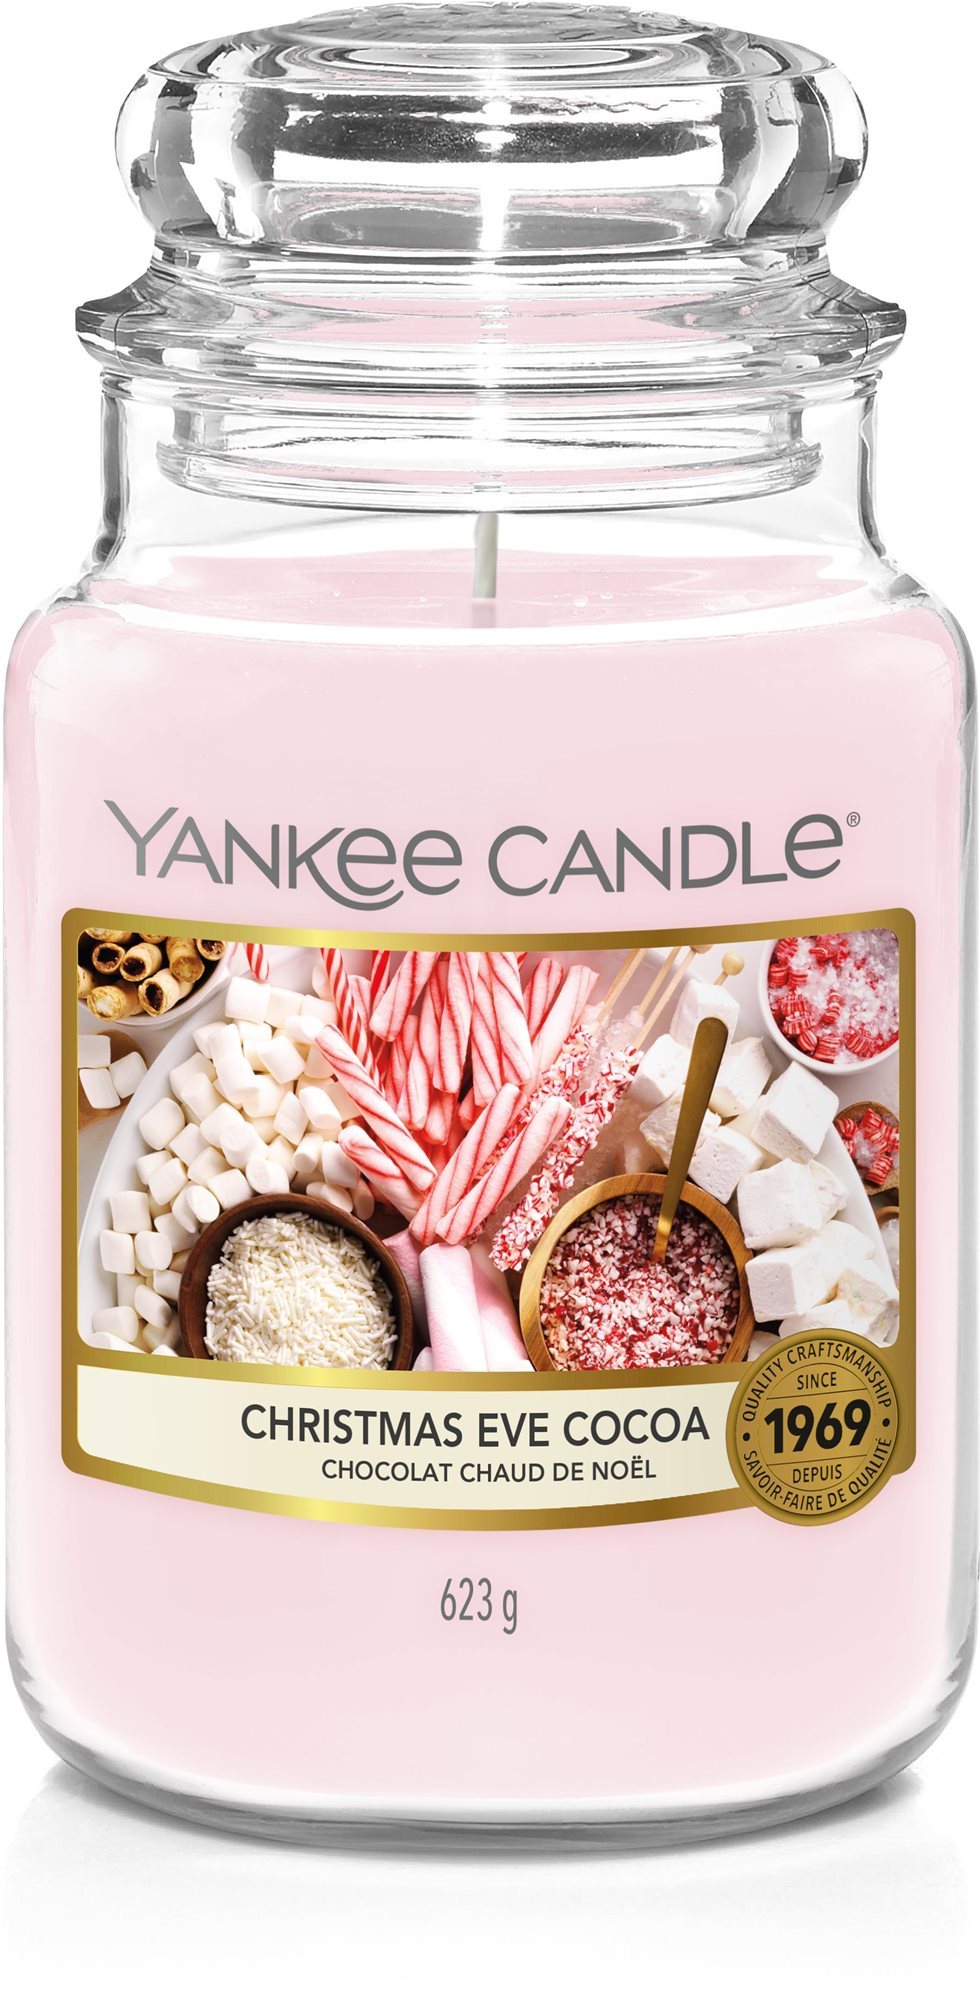 YANKEE CANDLE Christmas Eve Cocoa 623 g